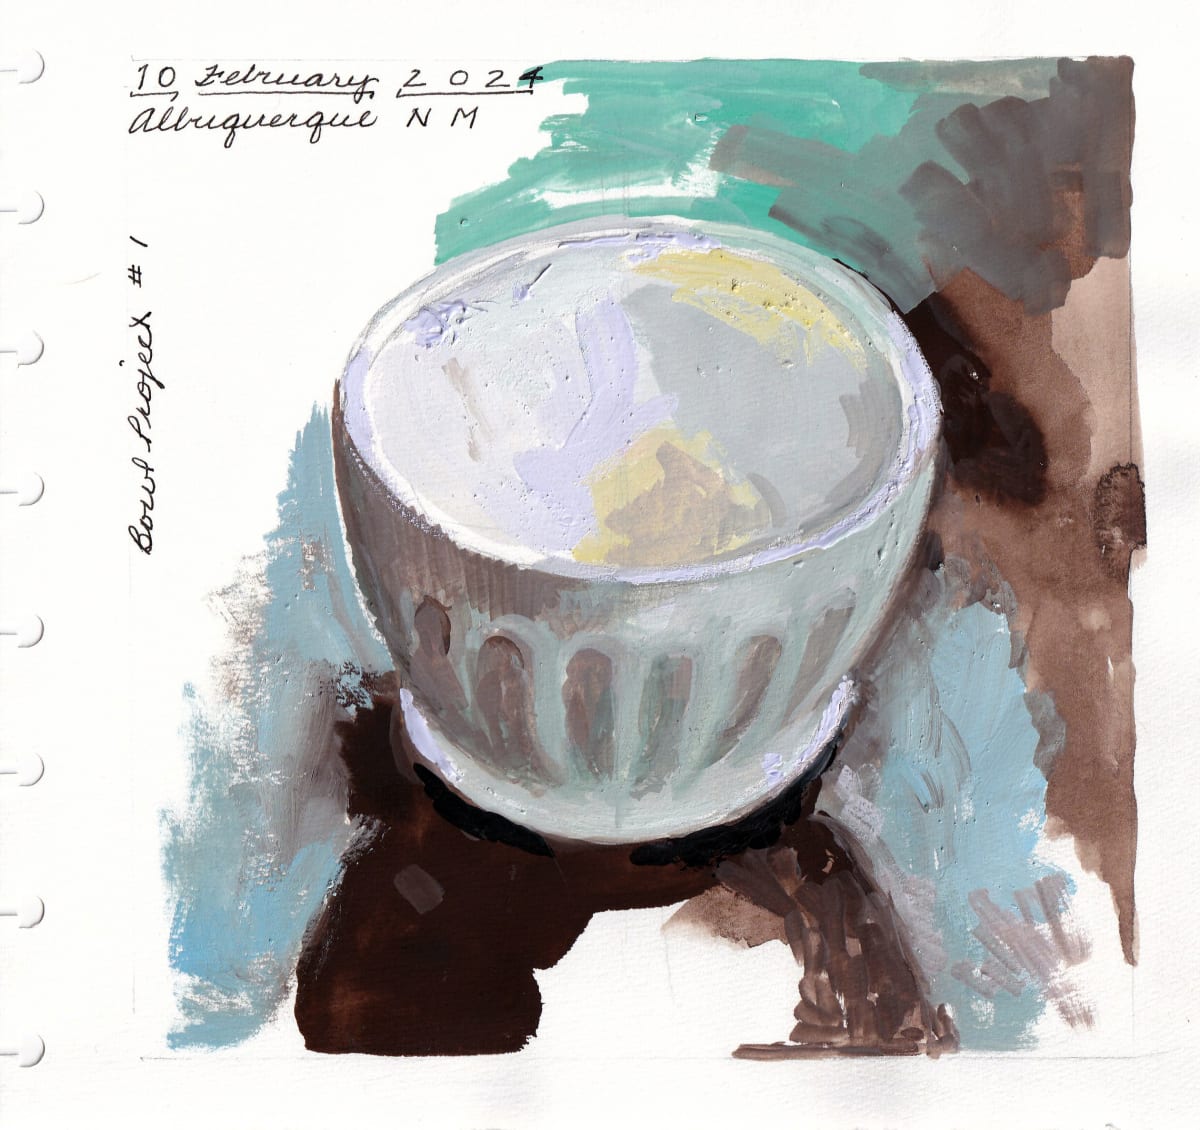 Journey Daybook Page by Margaret Pulis Herrick (Peggy)  Image: Bowl Project #1